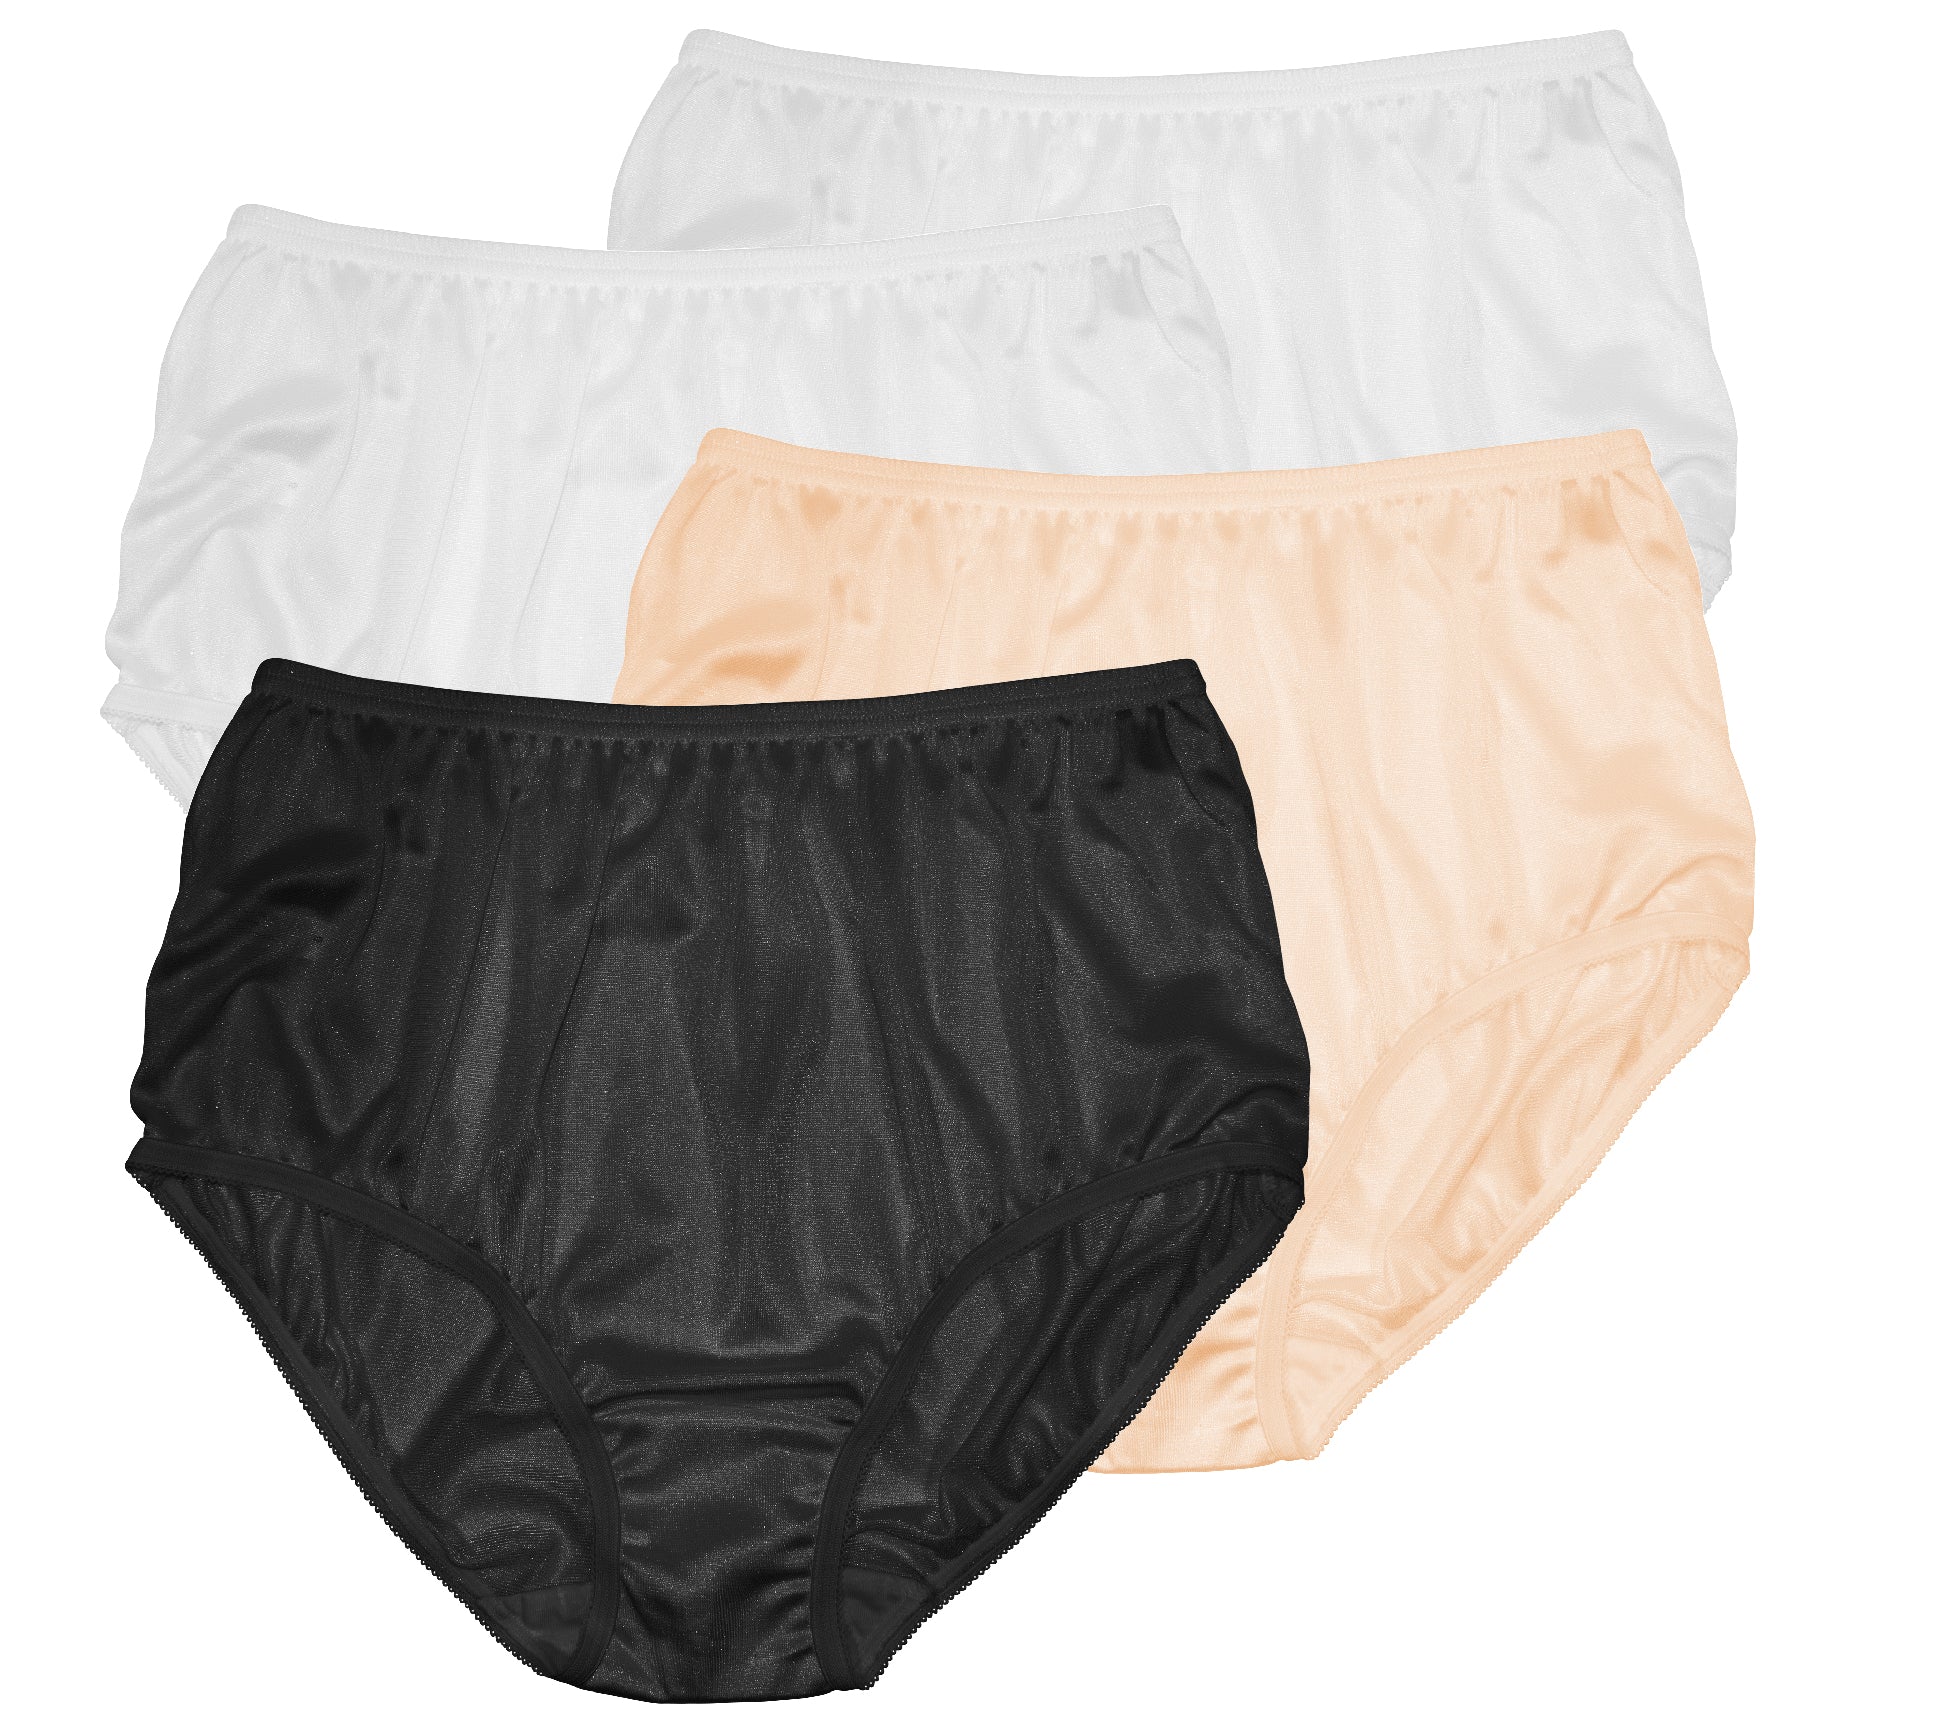 Classic Nylon, Full Coverage Brief Panty Neutral Color 4 Pack (Plain Jane)